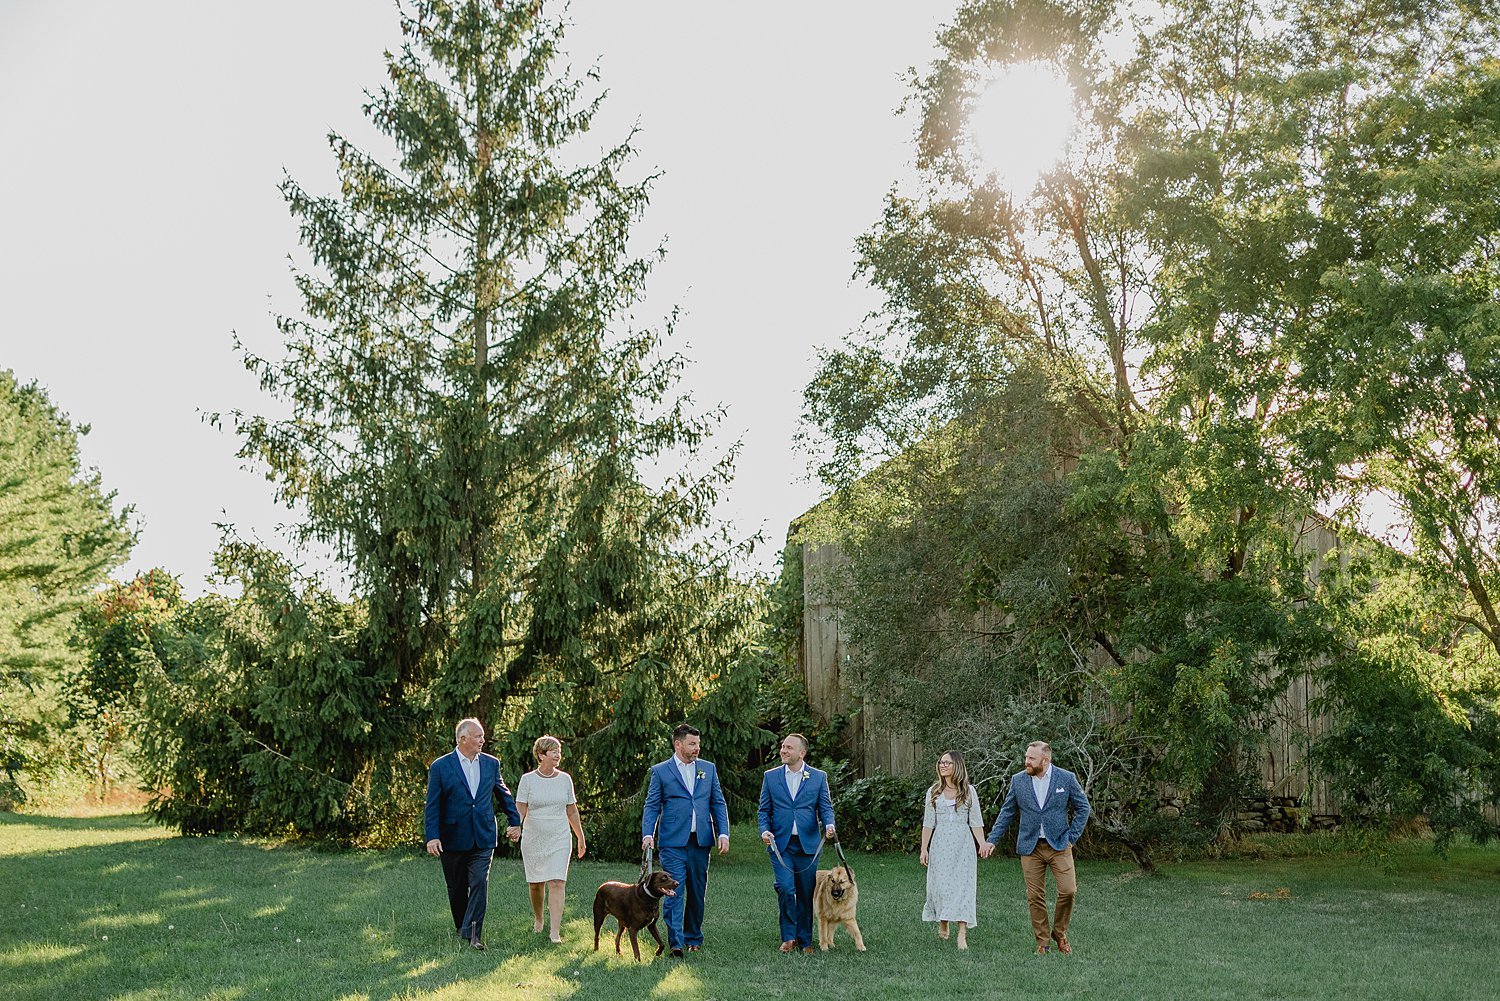 An Intimate Elopement at an Airbnb in Prince Edward County | Prince Edward County Wedding Photographer | Holly McMurter Photographs_0012.jpg